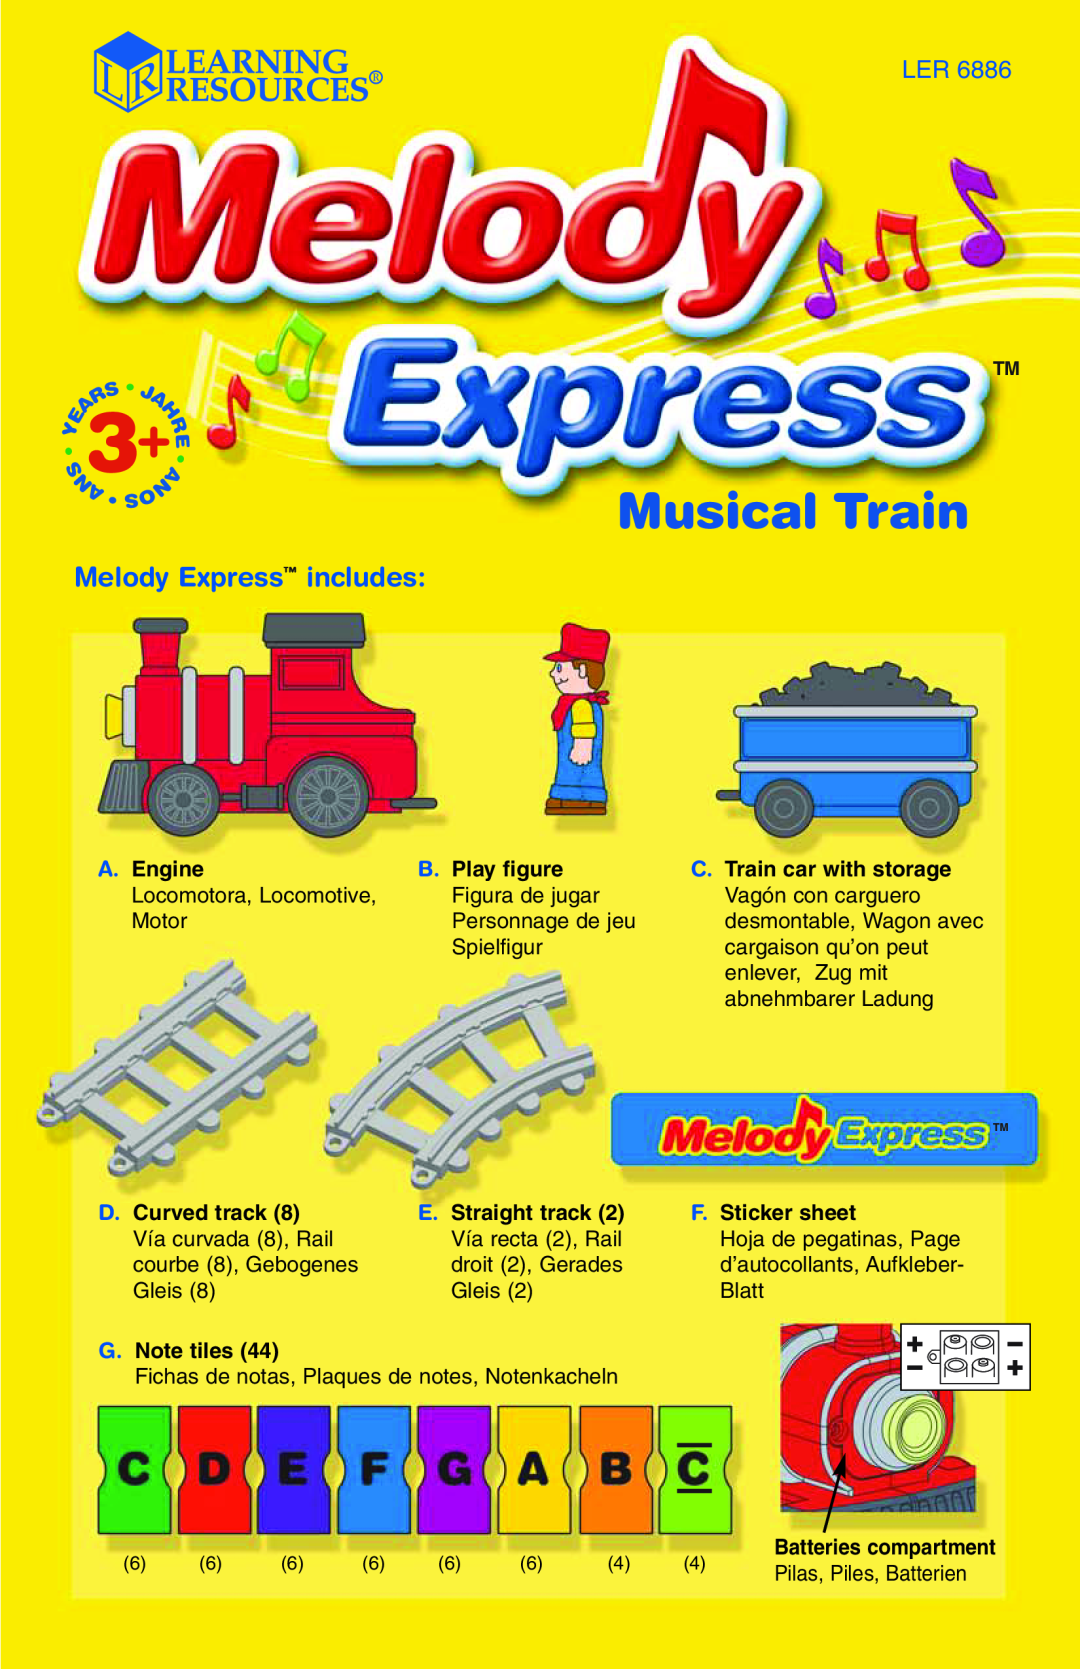 Learning Resources LER 6886 manual Melody Express includes, N3 NA, Musical Train, A. Engine, B. Play figure, G. Note tiles 